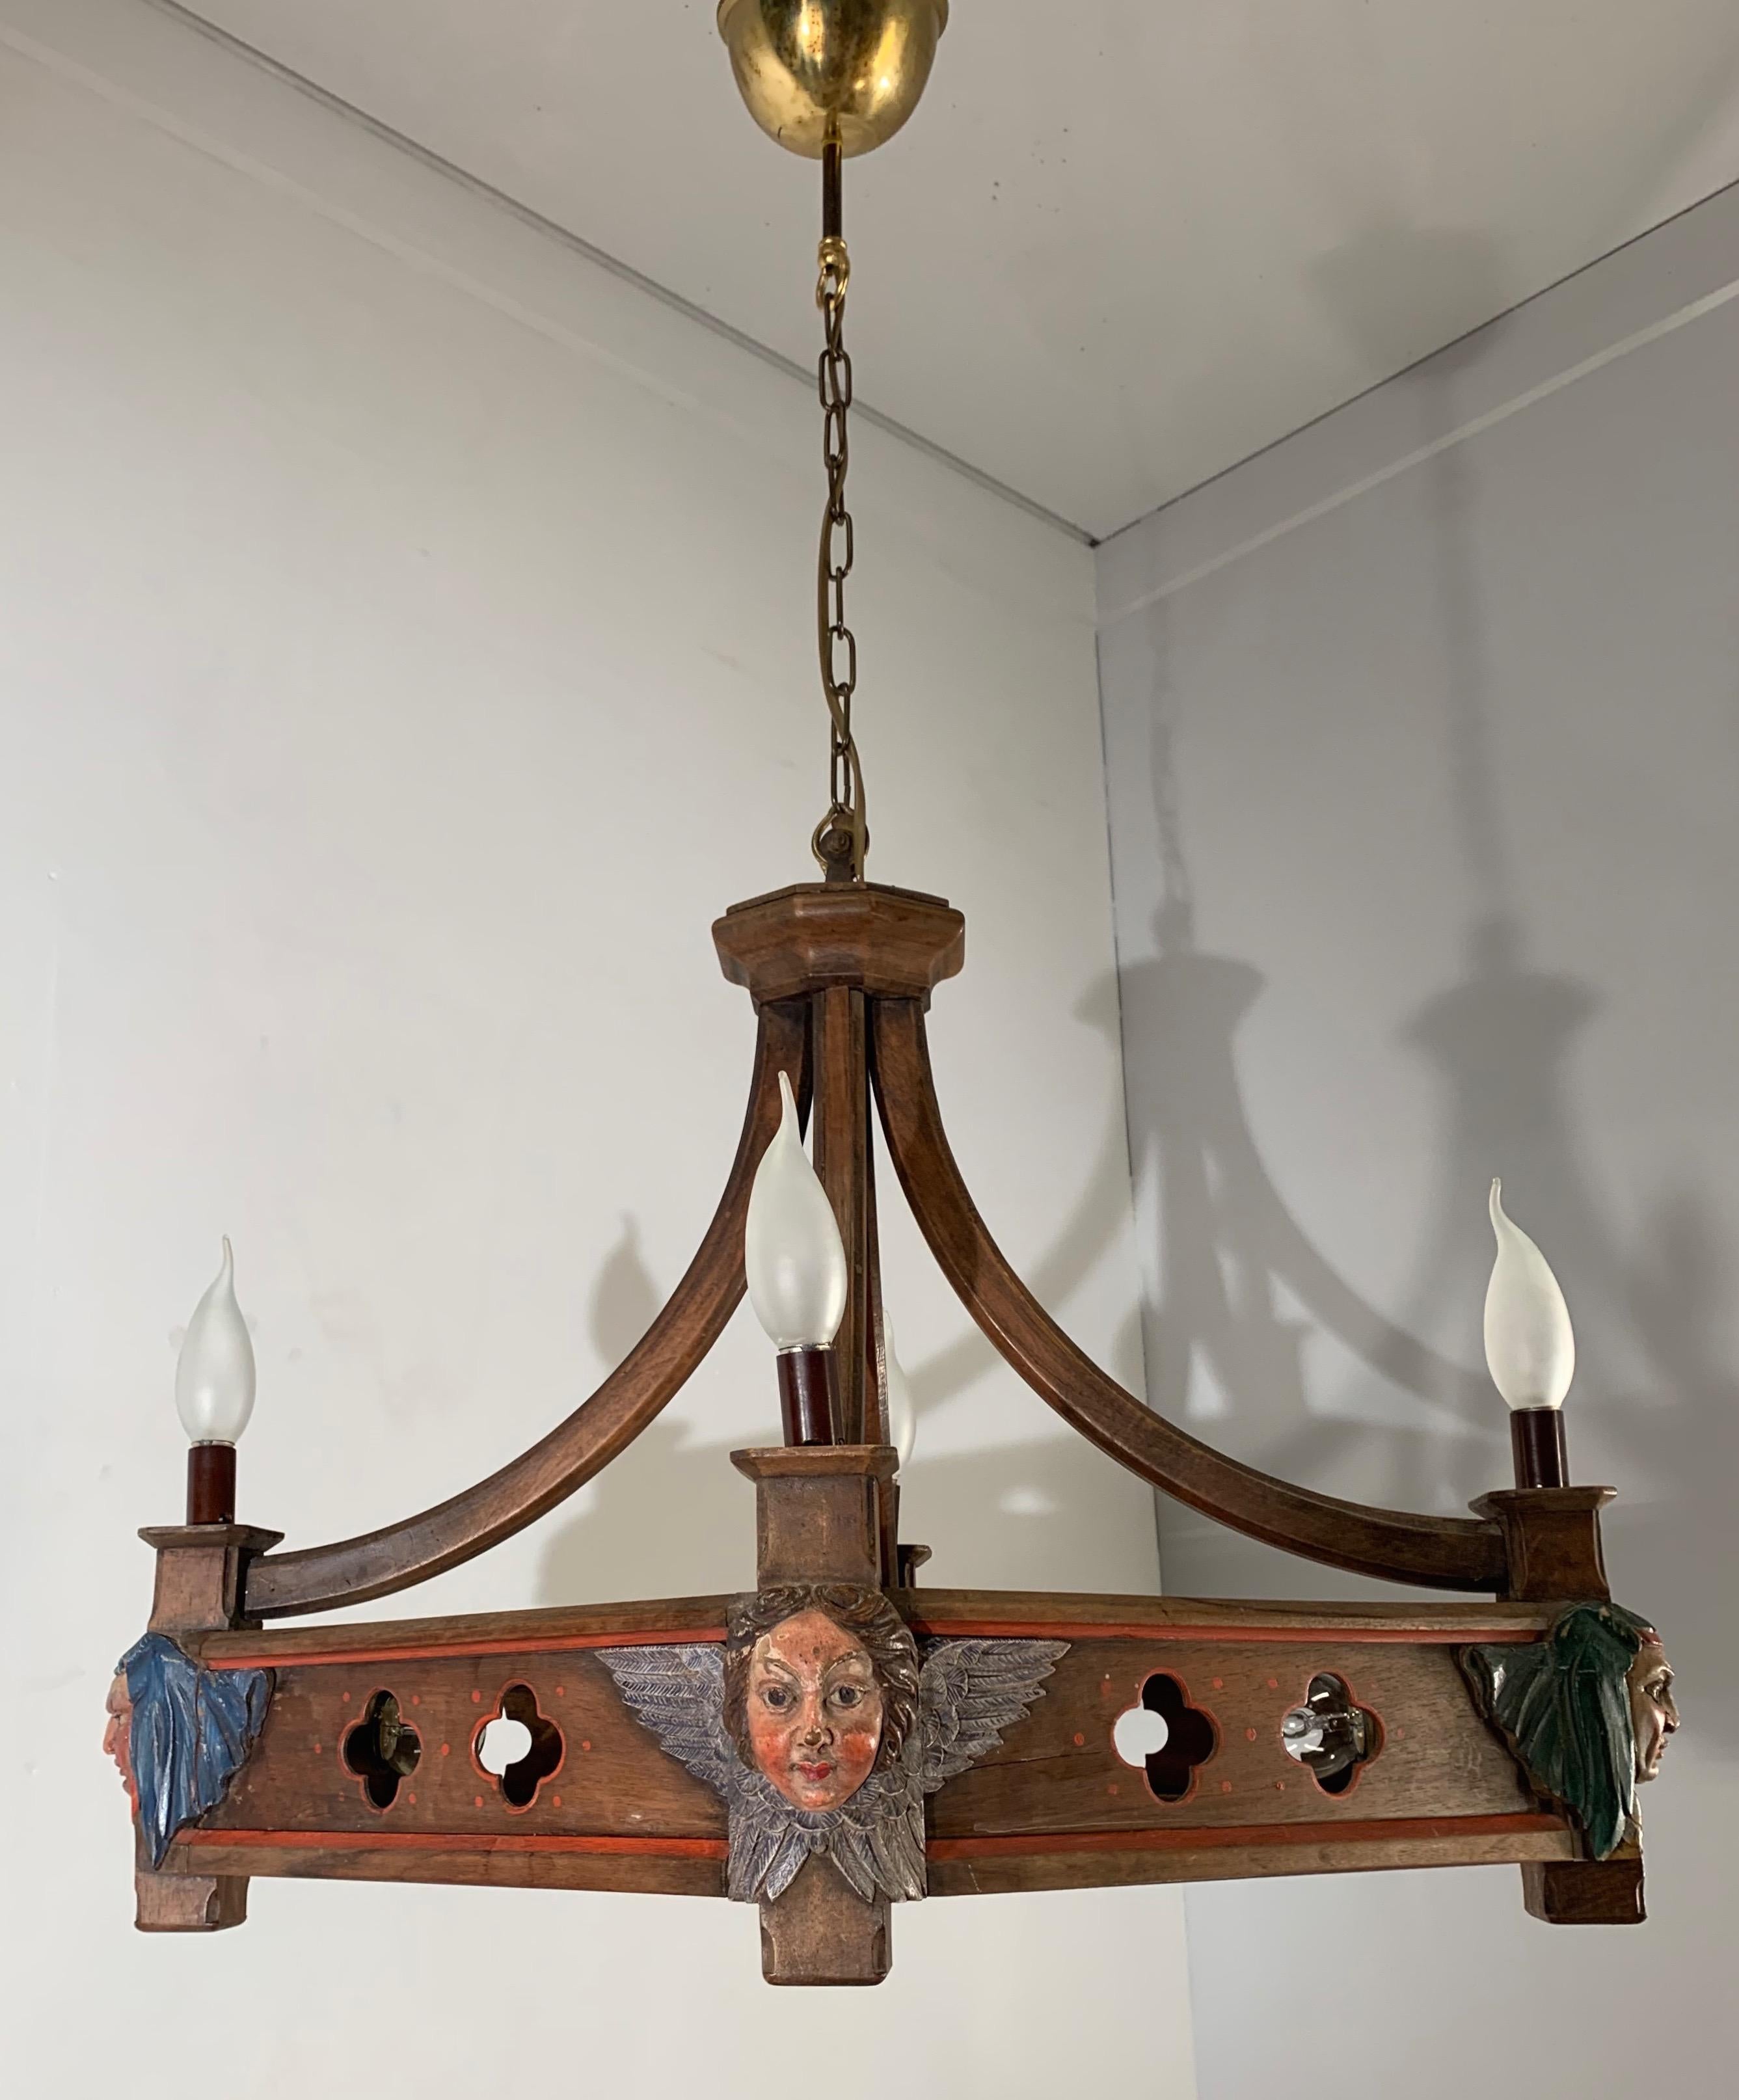 Unique and meaningful Gothic Revival pendant with hand carved and hand painted masks.

For the collectors of rare and quality crafted light fixtures, we also have this striking and meaningful 8 light, Gothic style fixture. This work of Gothic